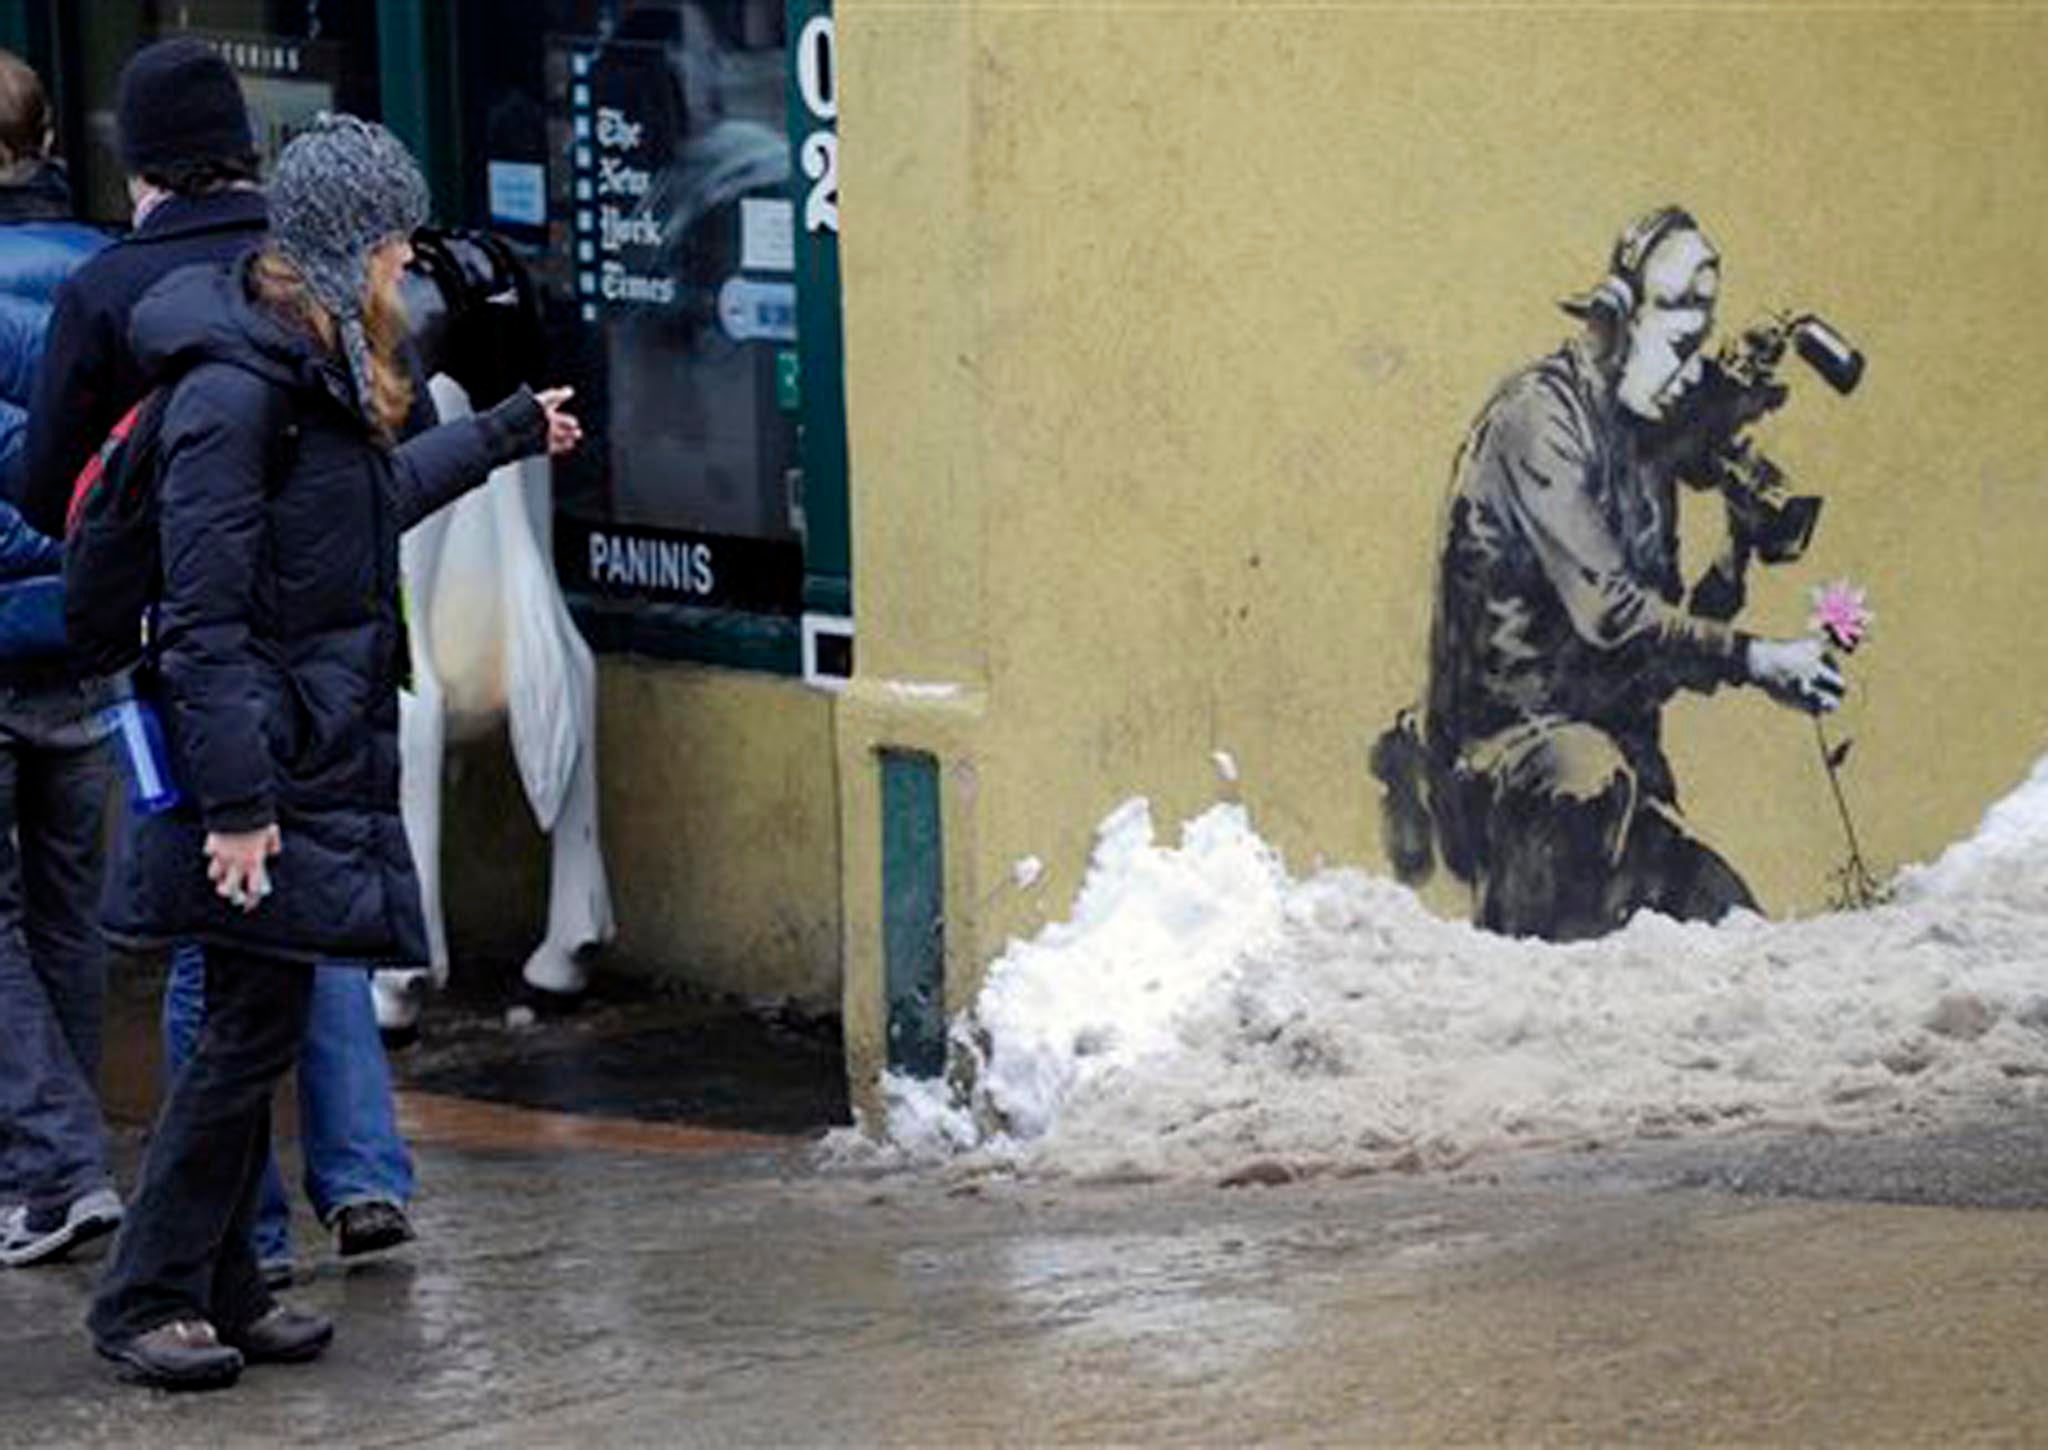 A pedestrian points at one of Banksy's artworks in Park City in Utah